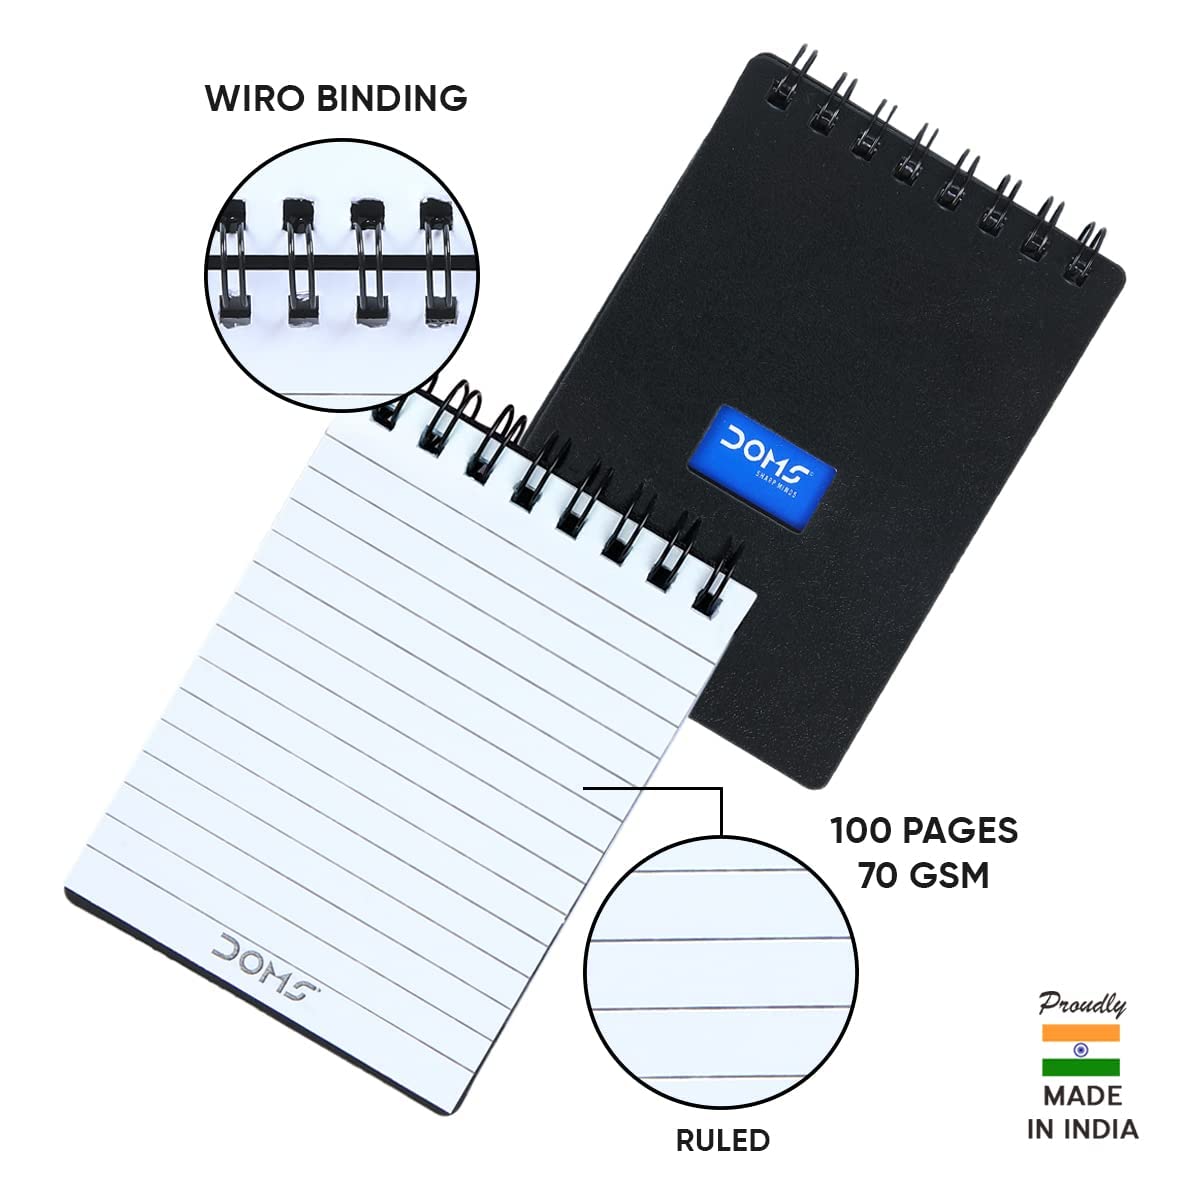 DOMS Office Smart Kit | Best for School, College & Office | 41 Assorted Items | Markers, Ball Pen, Graphite Pencil, Correction Pens, Pocket Dairy | DOMS Stationery | Stationery Items for Office